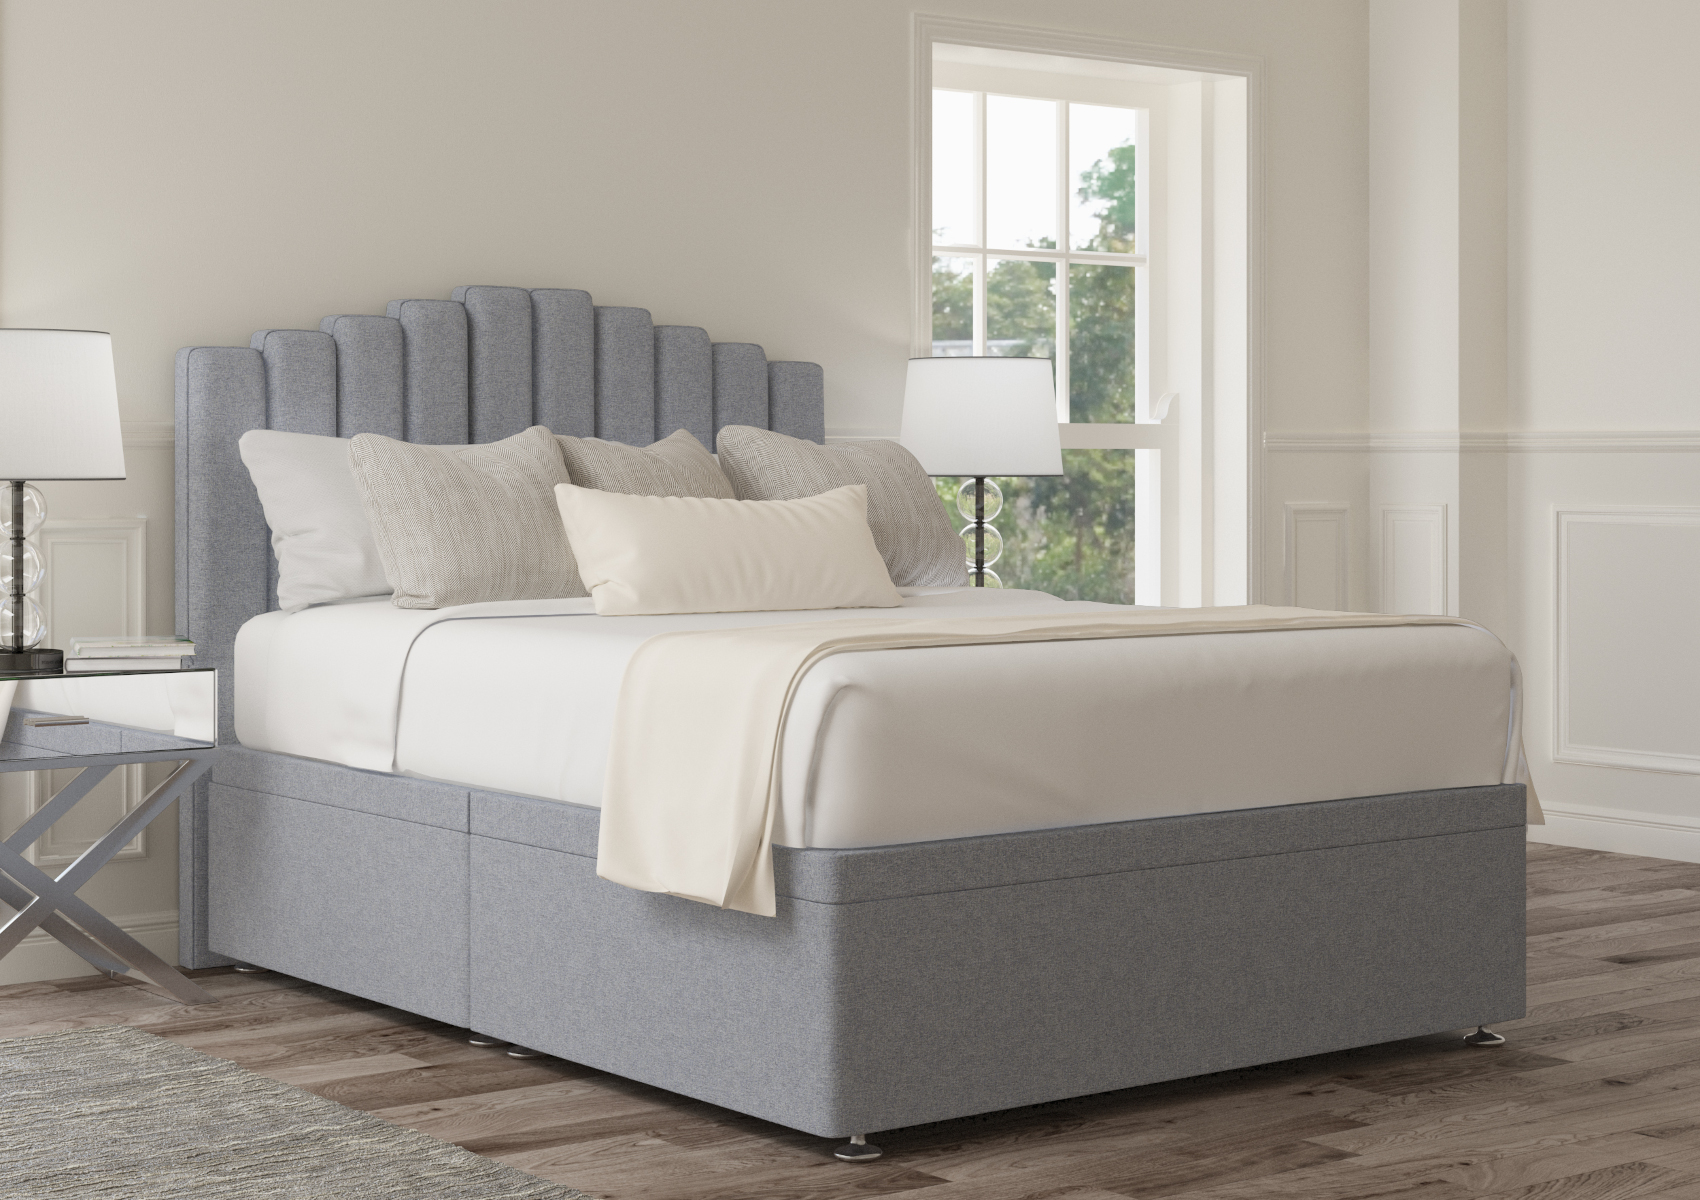 View Quinn Trebla Stone Upholstered Double Ottoman Bed Time4Sleep information